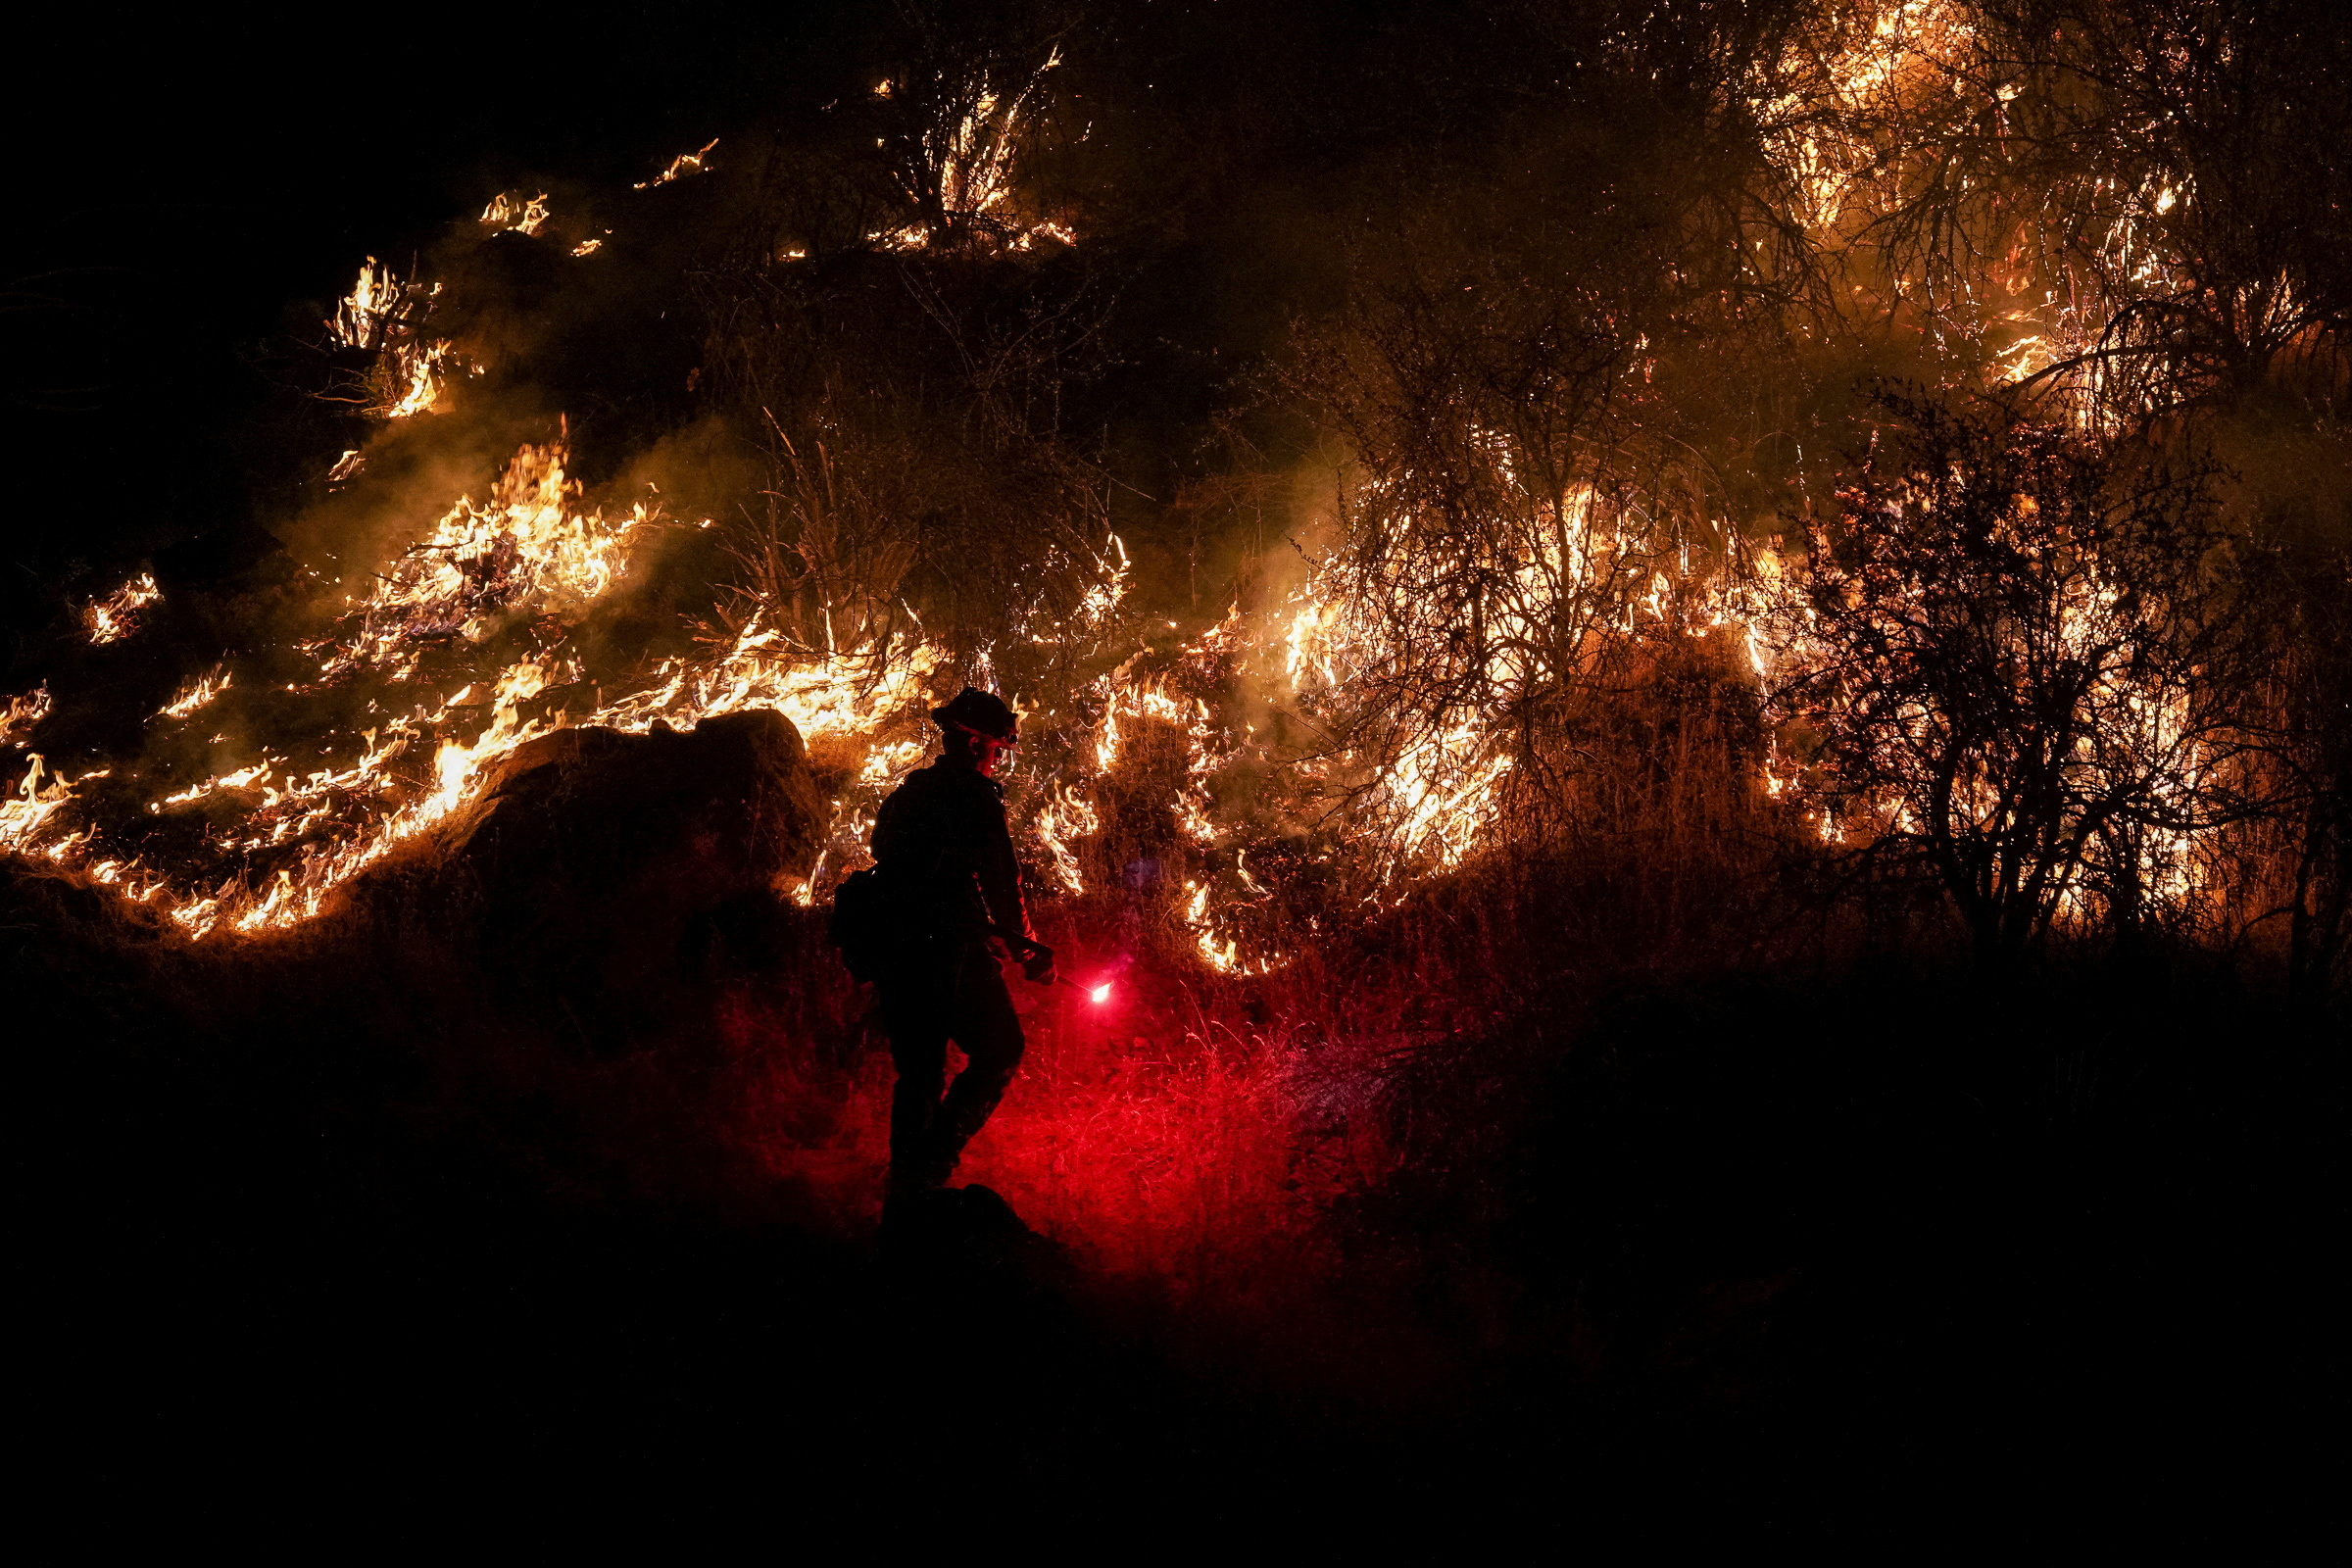 PHOTO: A firefighter works to mitigate the flames as the Oak Fire burns near Mariposa, Calif., July 22, 2022.